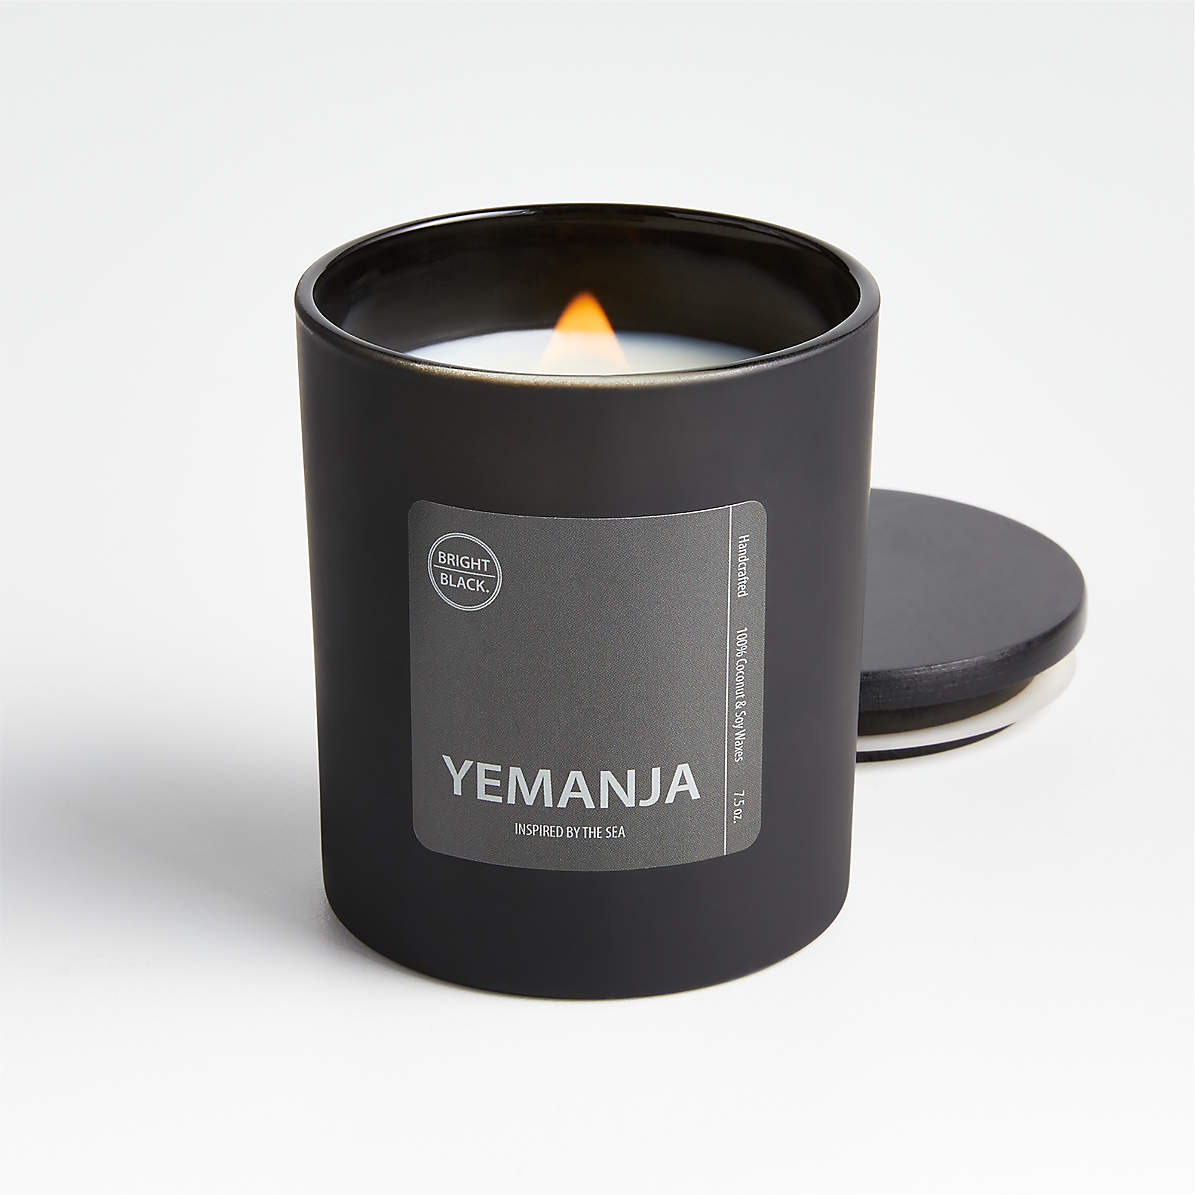 WoodWick Candles on Sale, Up to 30% Discount & Free Shipping